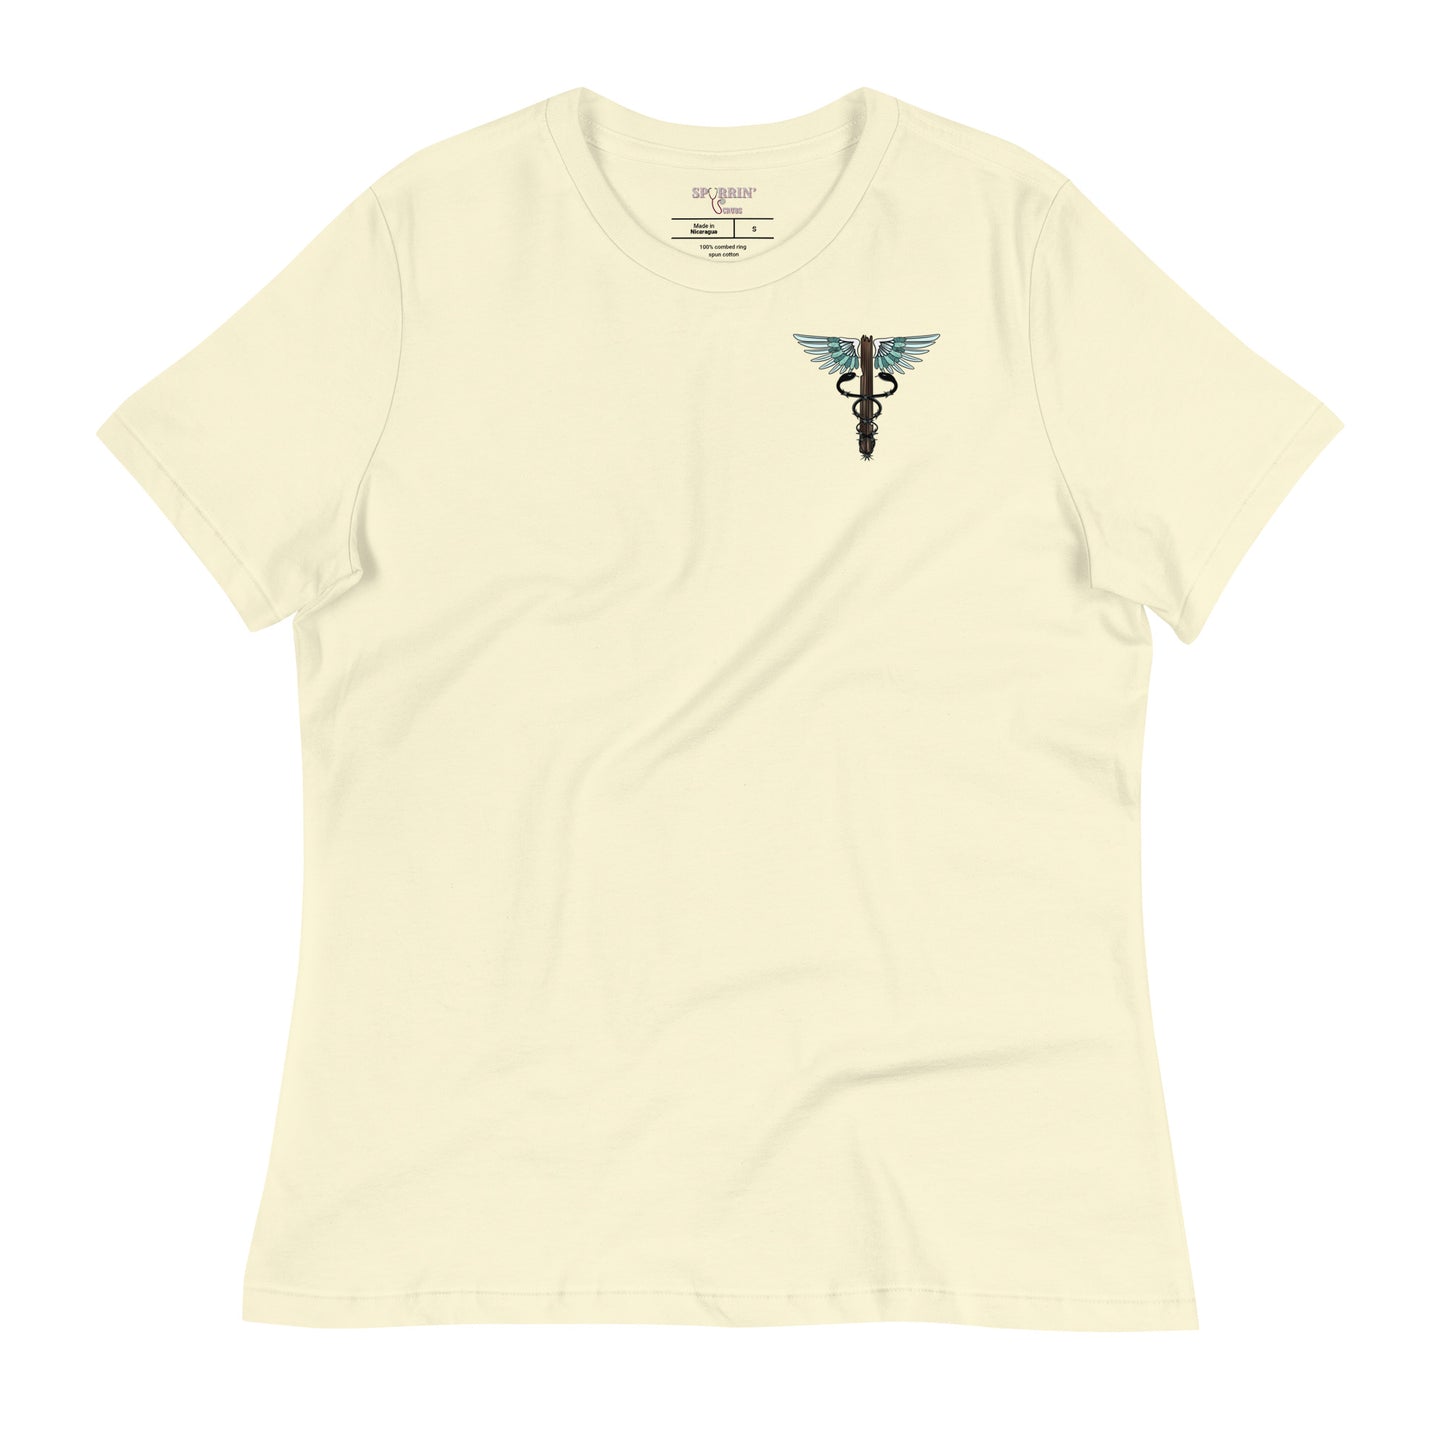 Support Your Local- Light Colors Women's Relaxed T-Shirt